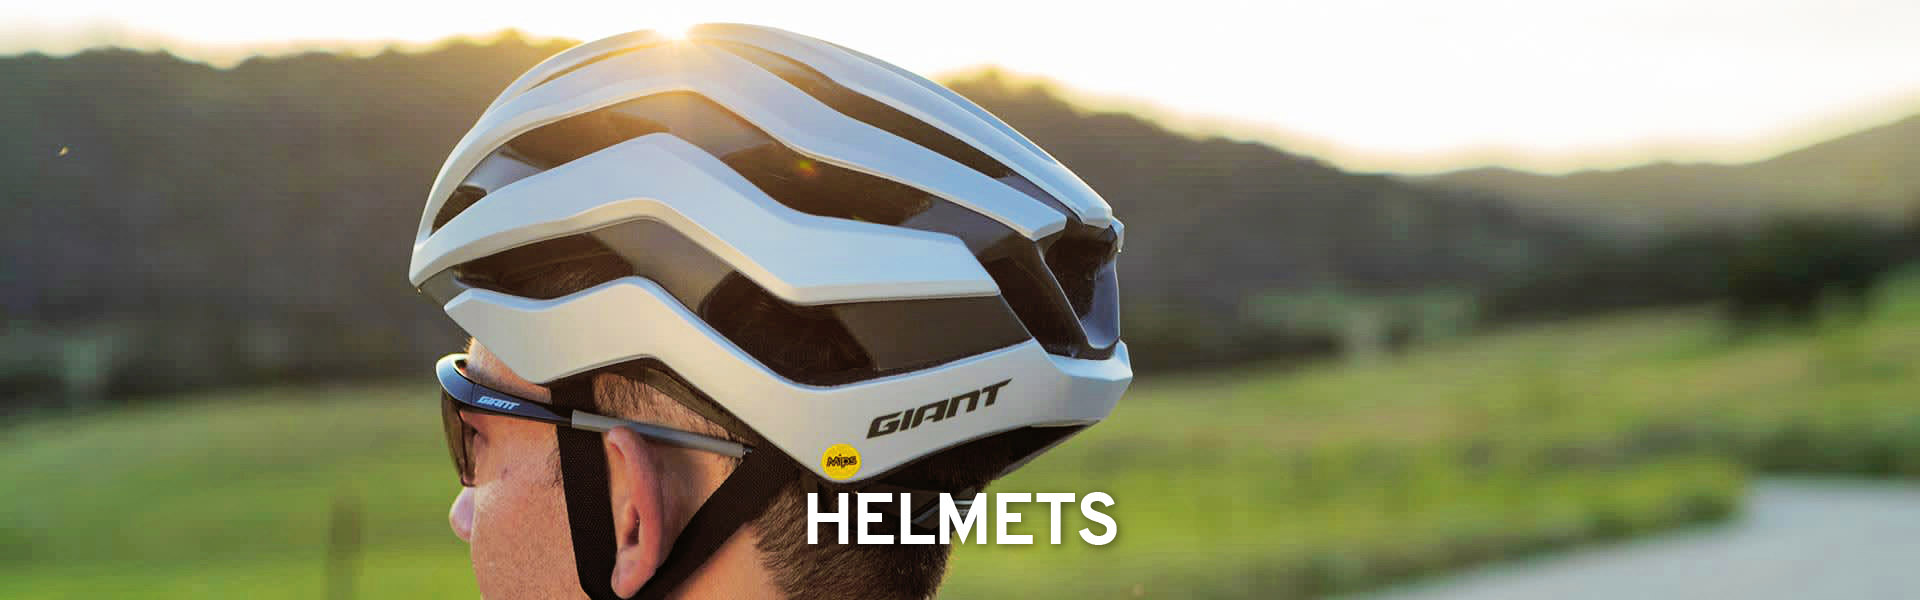 Giant Helmets On Sale At Beyond The Bike